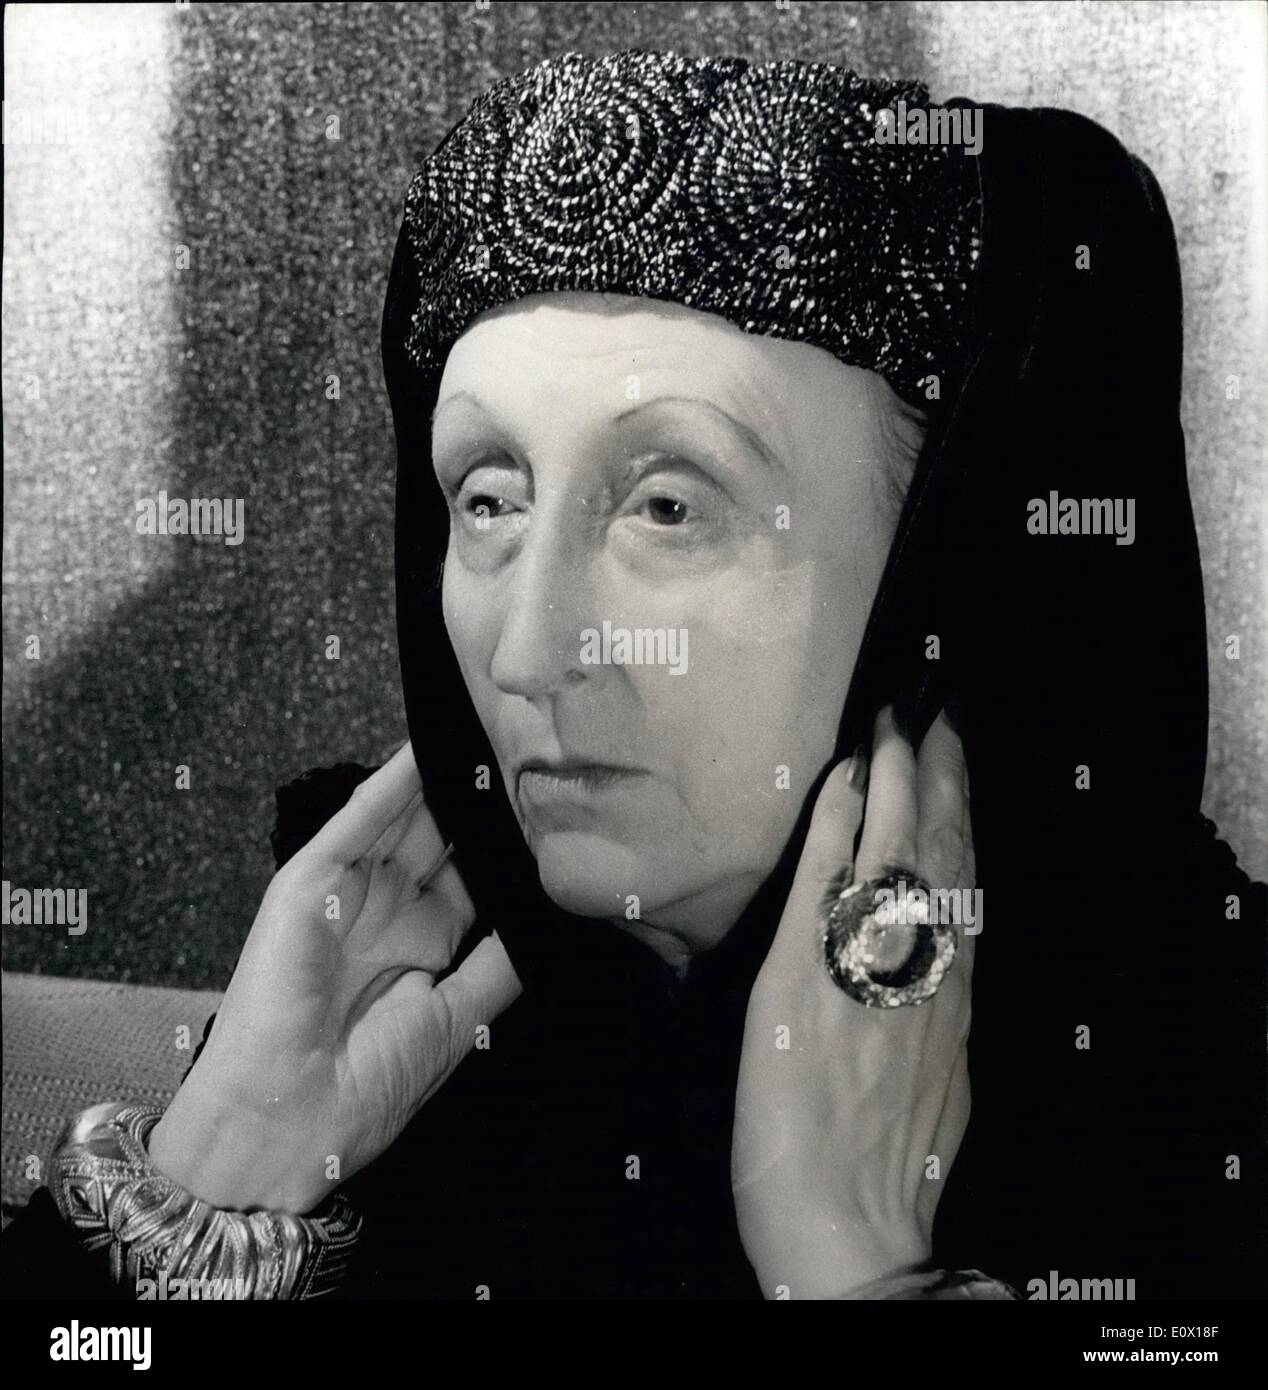 Dec. 12, 1964 - Dame Edith Sitwell Dies. Britain's Most Distinguished Spinters: Dame Edith Sitwell. Poet. rebel and Britain's Most Distinguished spinster died last night at the age of 77. She had been taken to St. Thomas Hospital after a heart attack. She had only finished her autobiography in April of this year and it is to be published in the New Year under the title Taken Care of . Photo shows dame Edith Sitwell- picture taken November 1952 Stock Photo